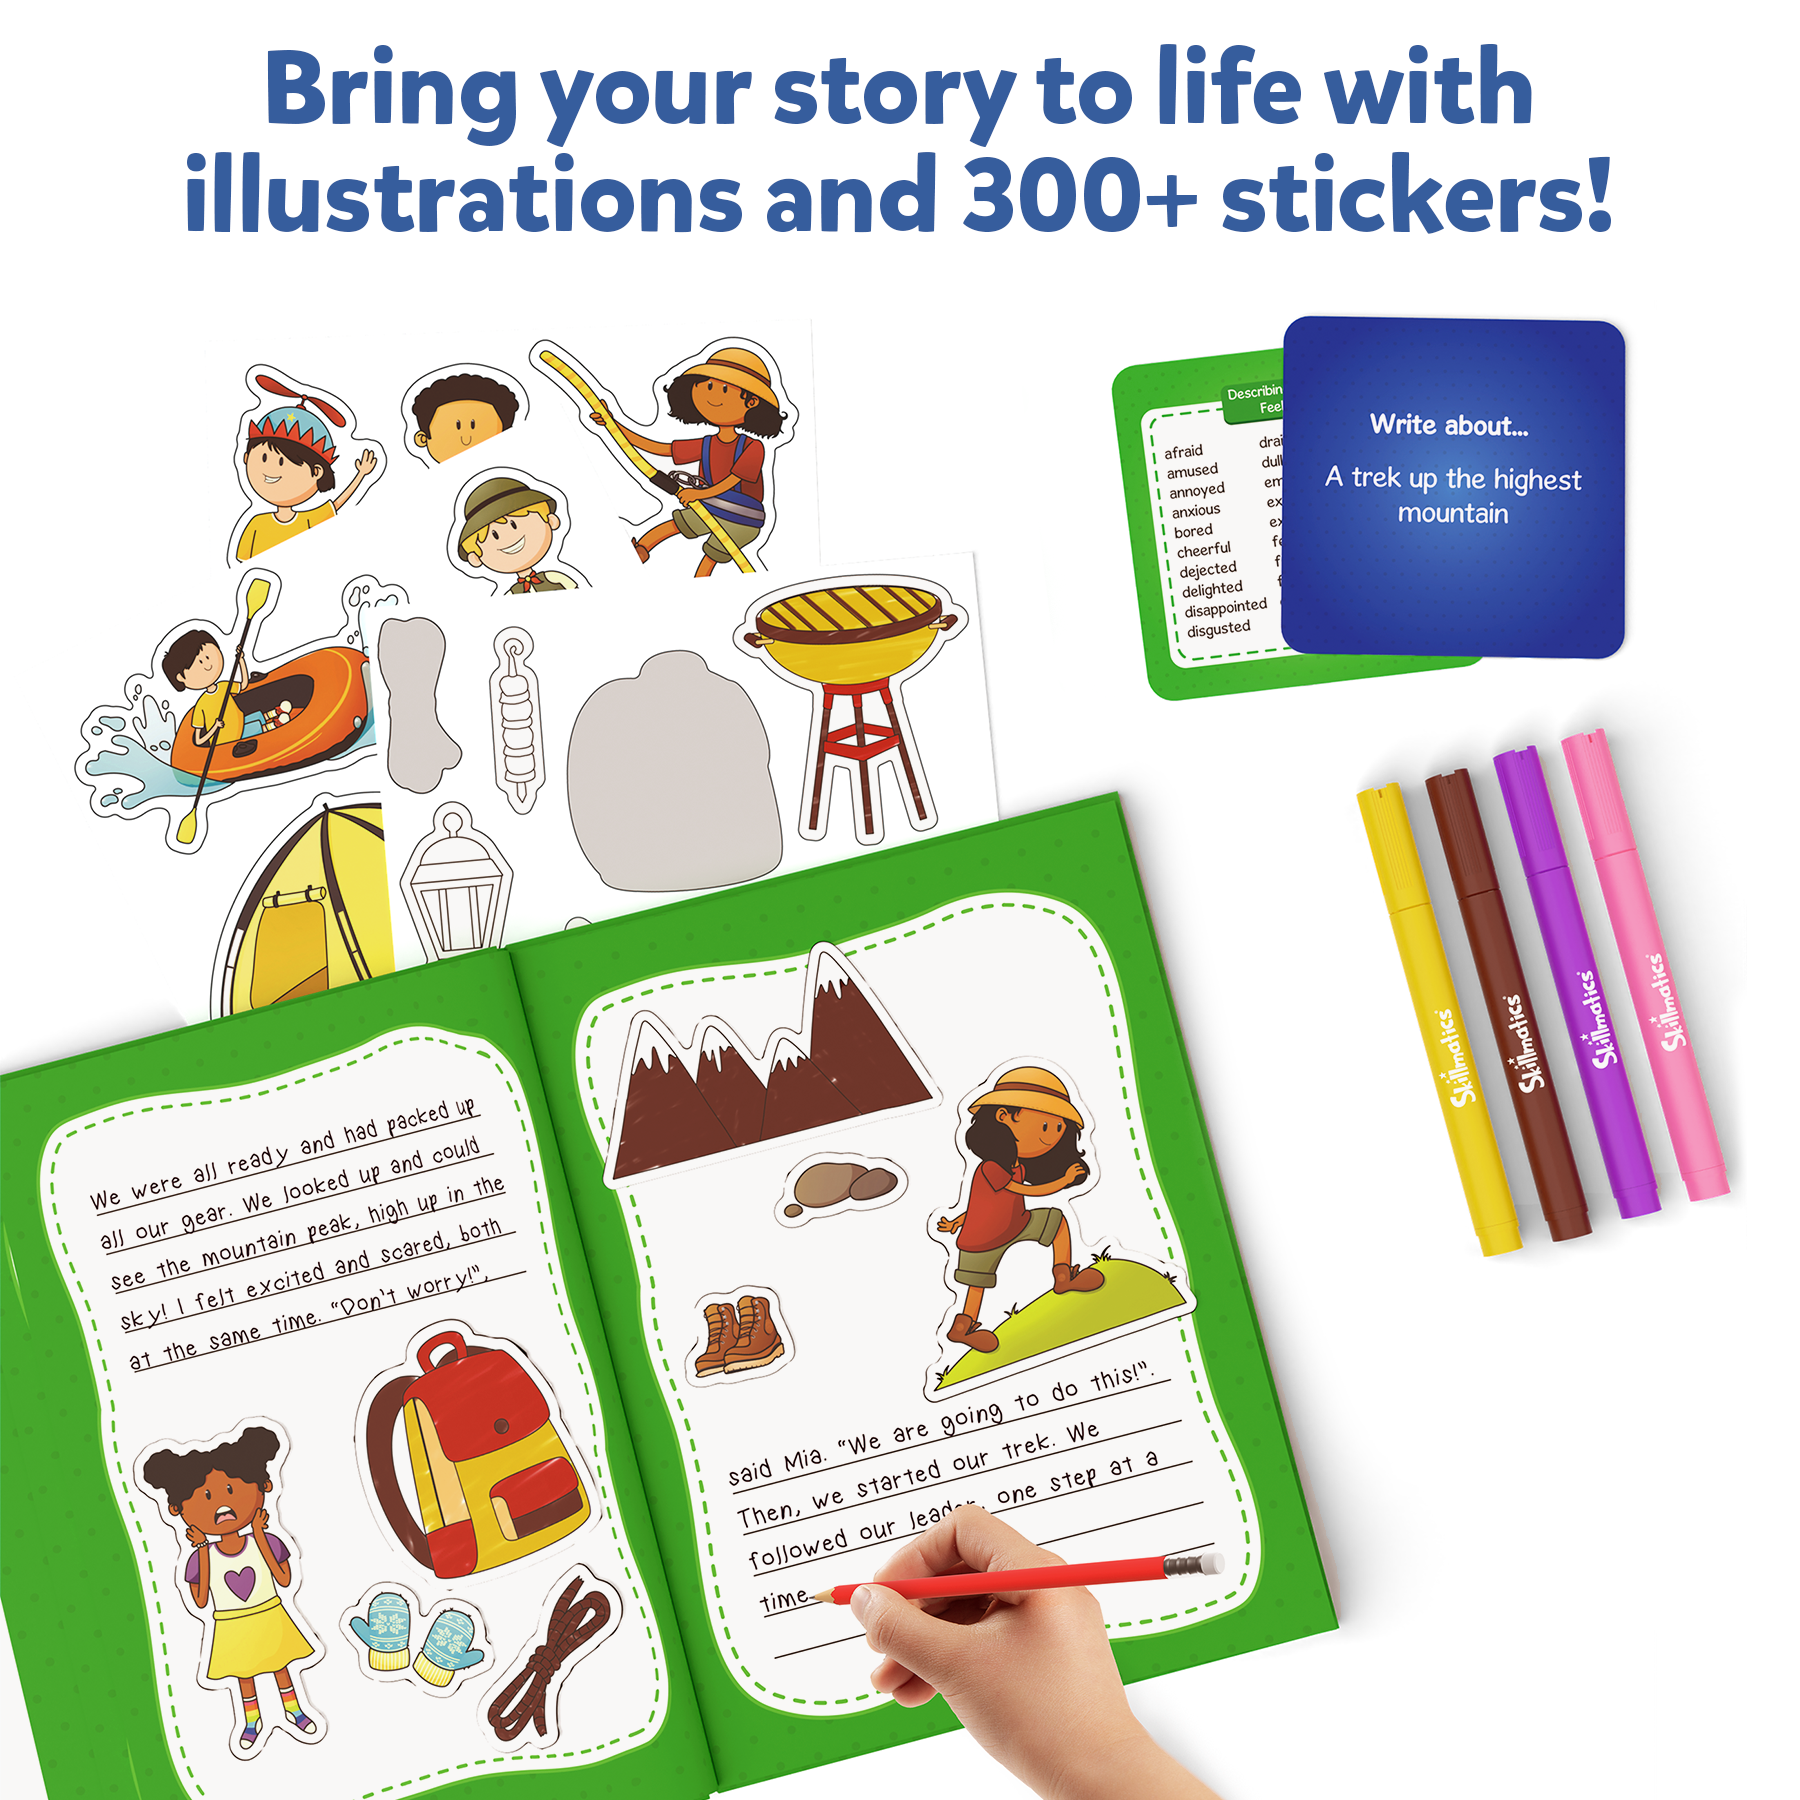 Skillmatics Storybook Art Kit - All My Adventures Art Kit for Kids, Write & Create Storybooks, Creative Activity for Boys & Girls, DIY Kit, 150+ Stickers, Gifts for Ages 5, 6, 7, 8, 9, 10